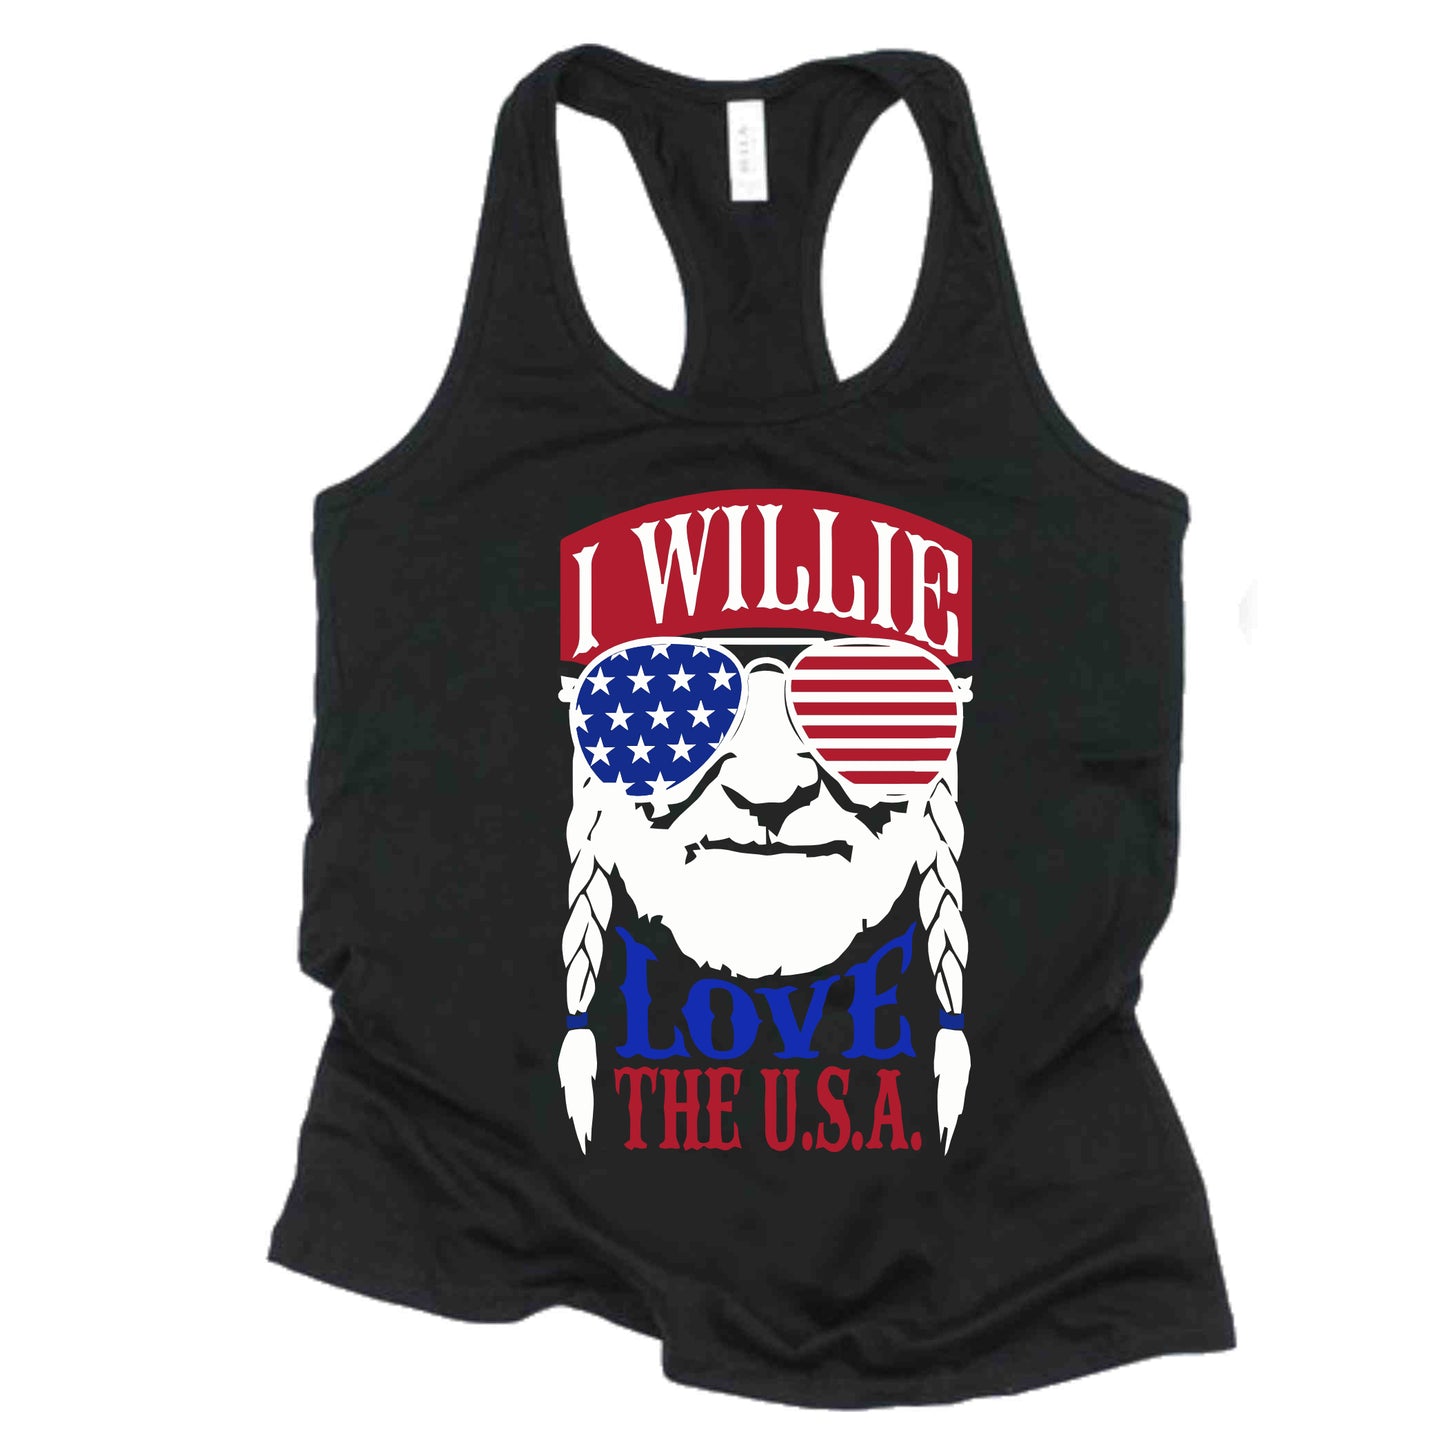 You'll Willie love our racerback tanks